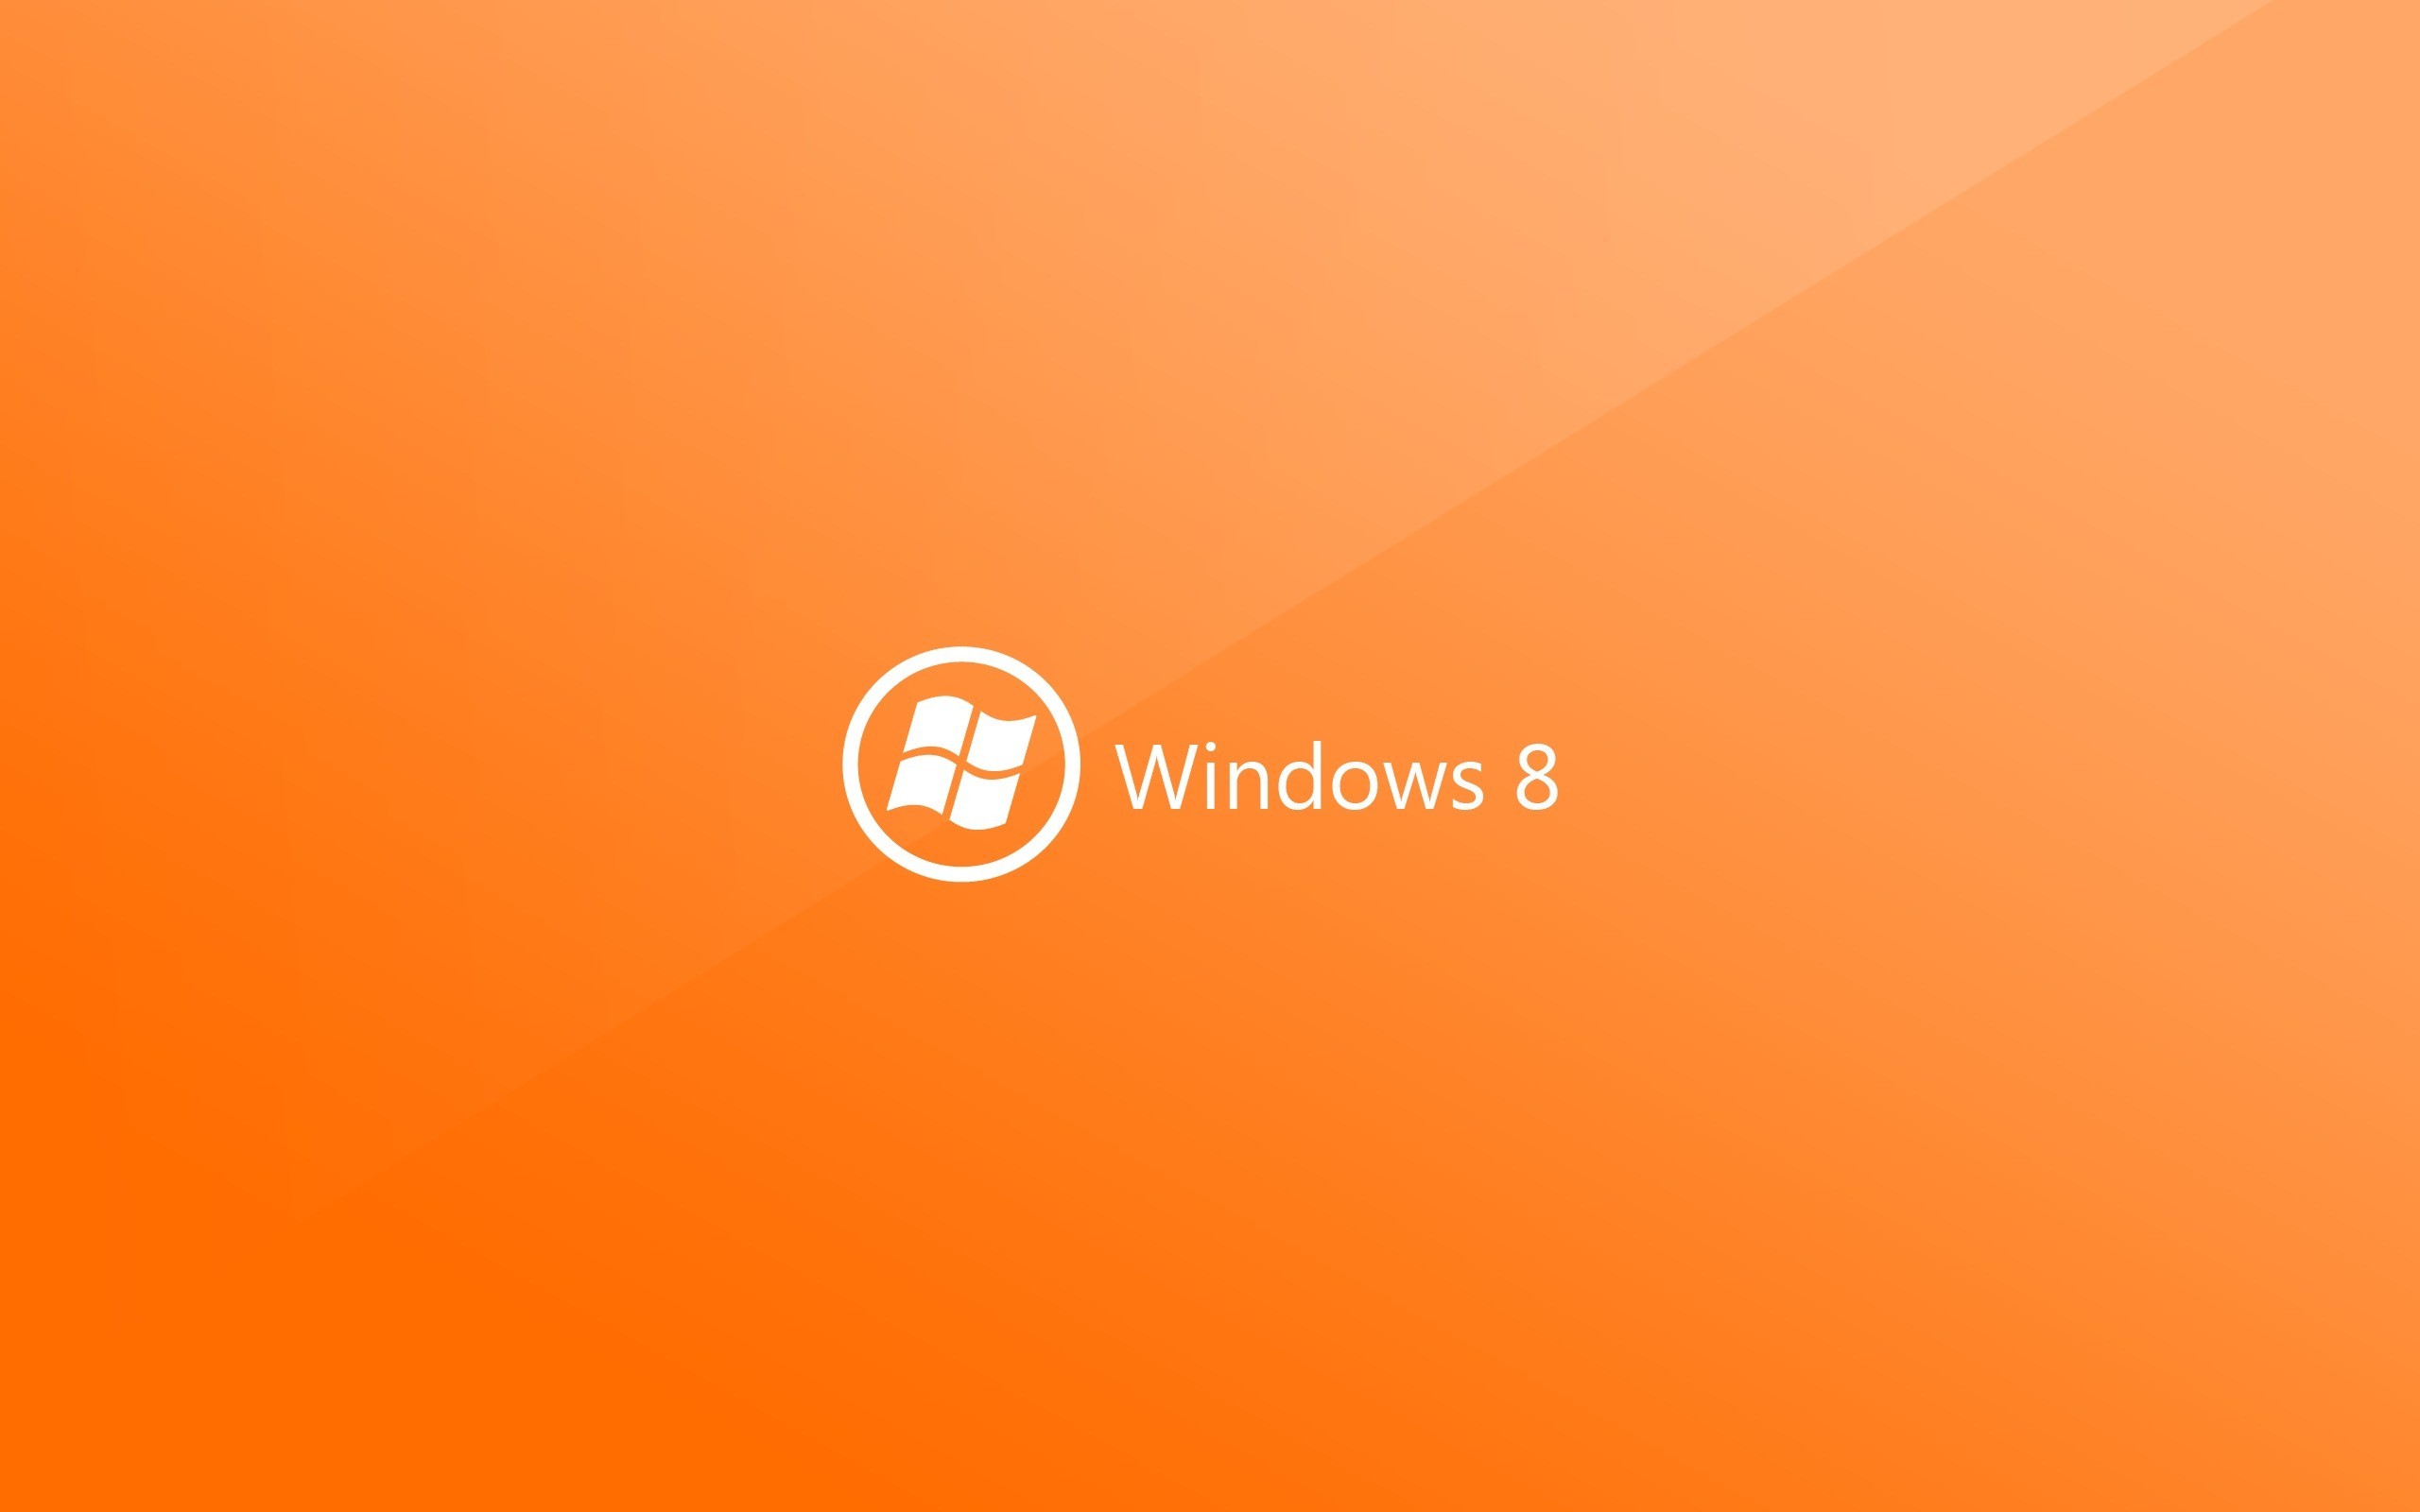 2560x1600 ... Next: Windows 8 Orange. Category: Computers wallpapers